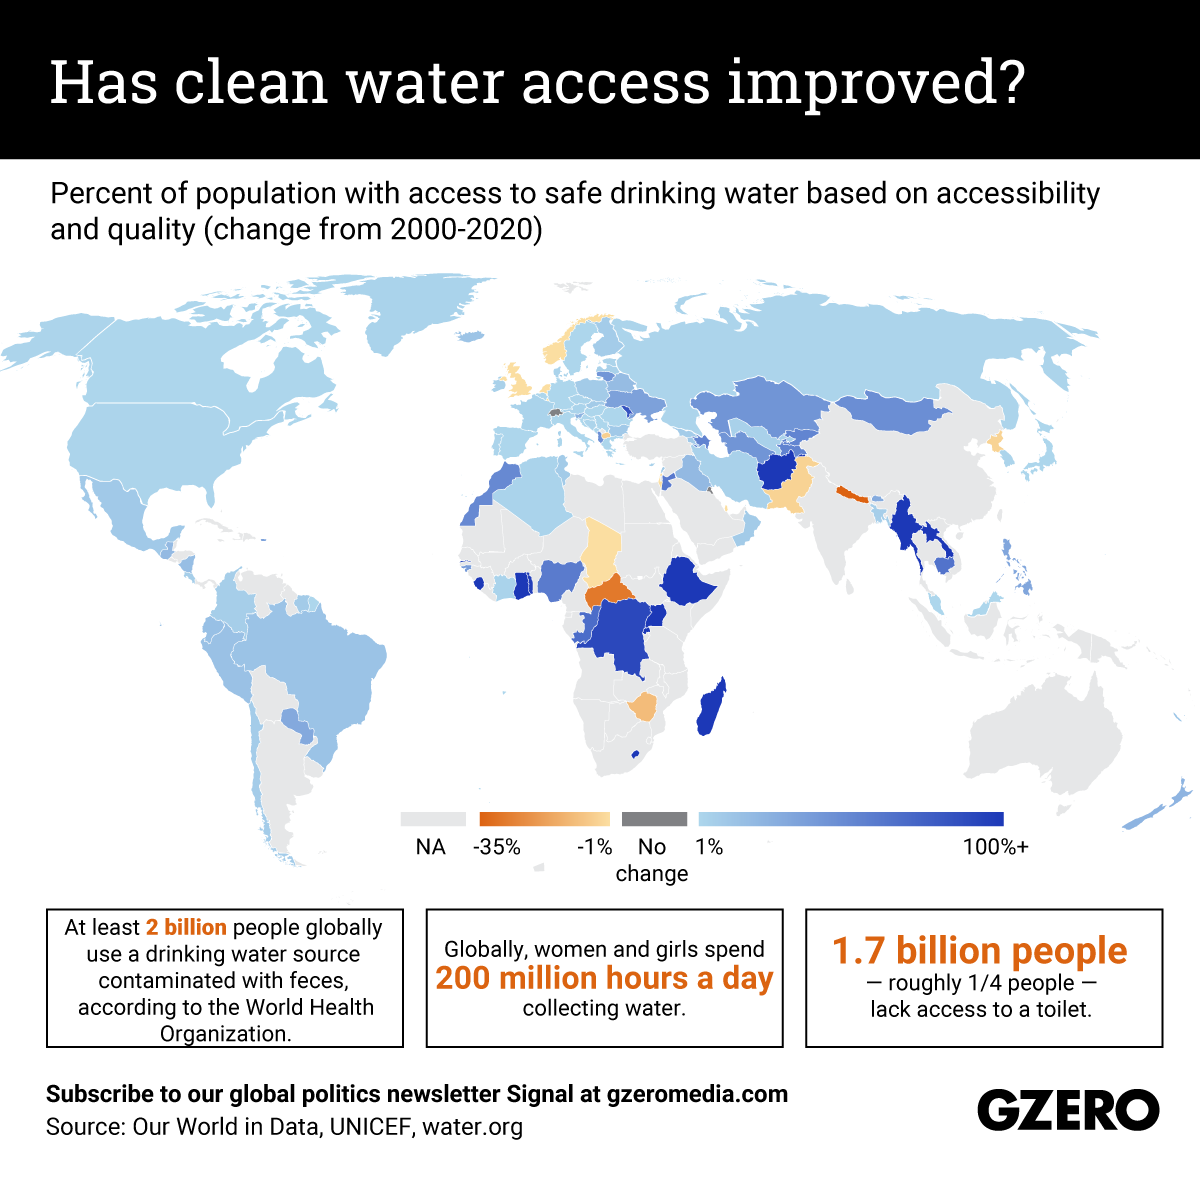 Has clean water access improved? Percent of population with access to safe drinking water based on accessiblity and quality (change from 2000-2020) | Infographic | The Graphic Truth